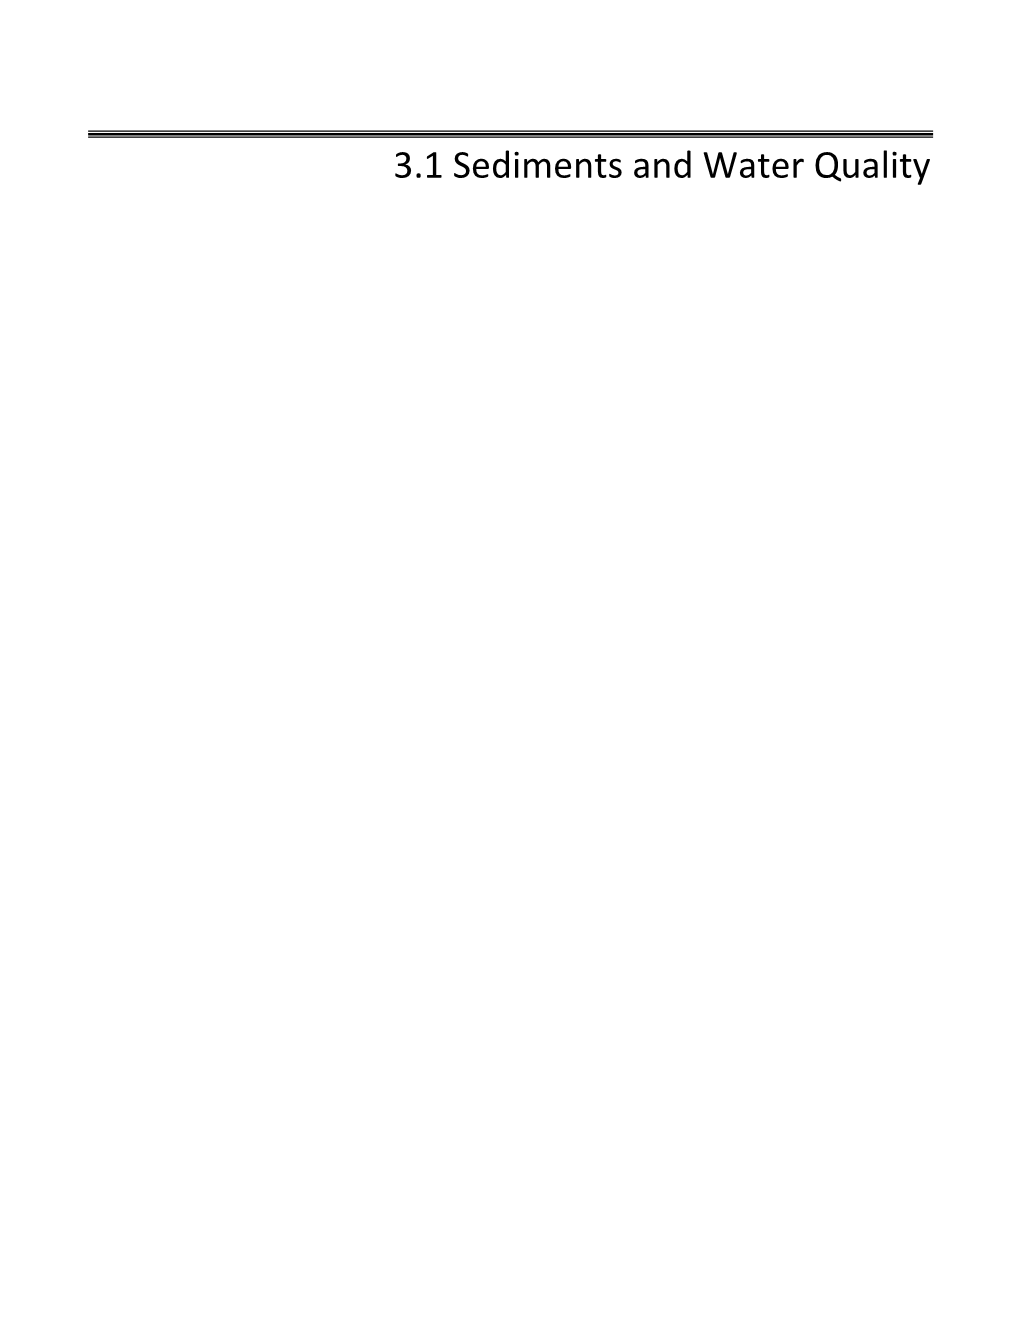 3.1 Sediments and Water Quality